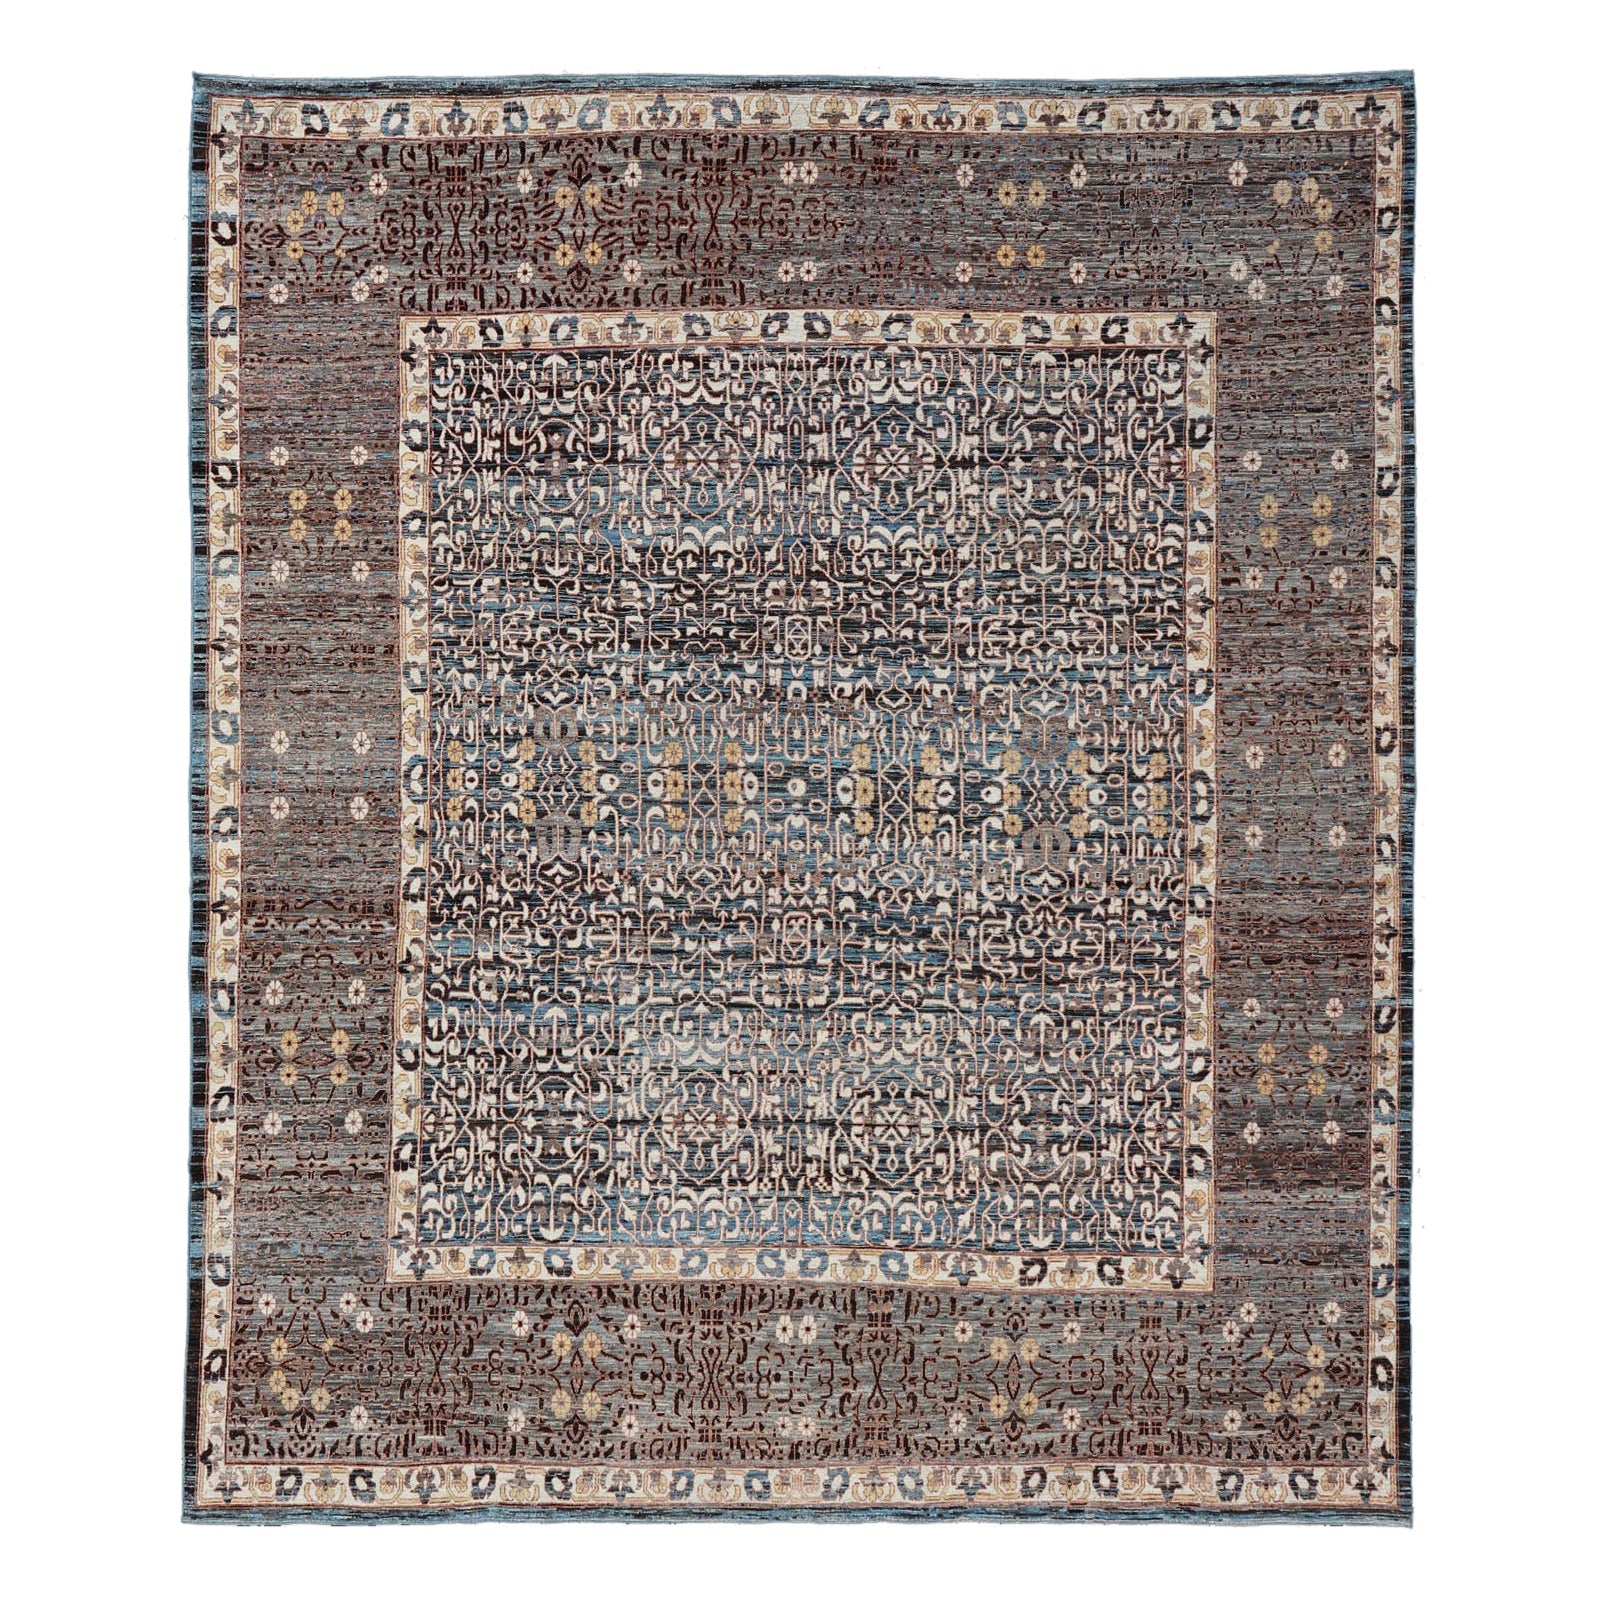 Contemporary Large Rug with Intricate All-Over Sub-Geometric Seljuk Design For Sale